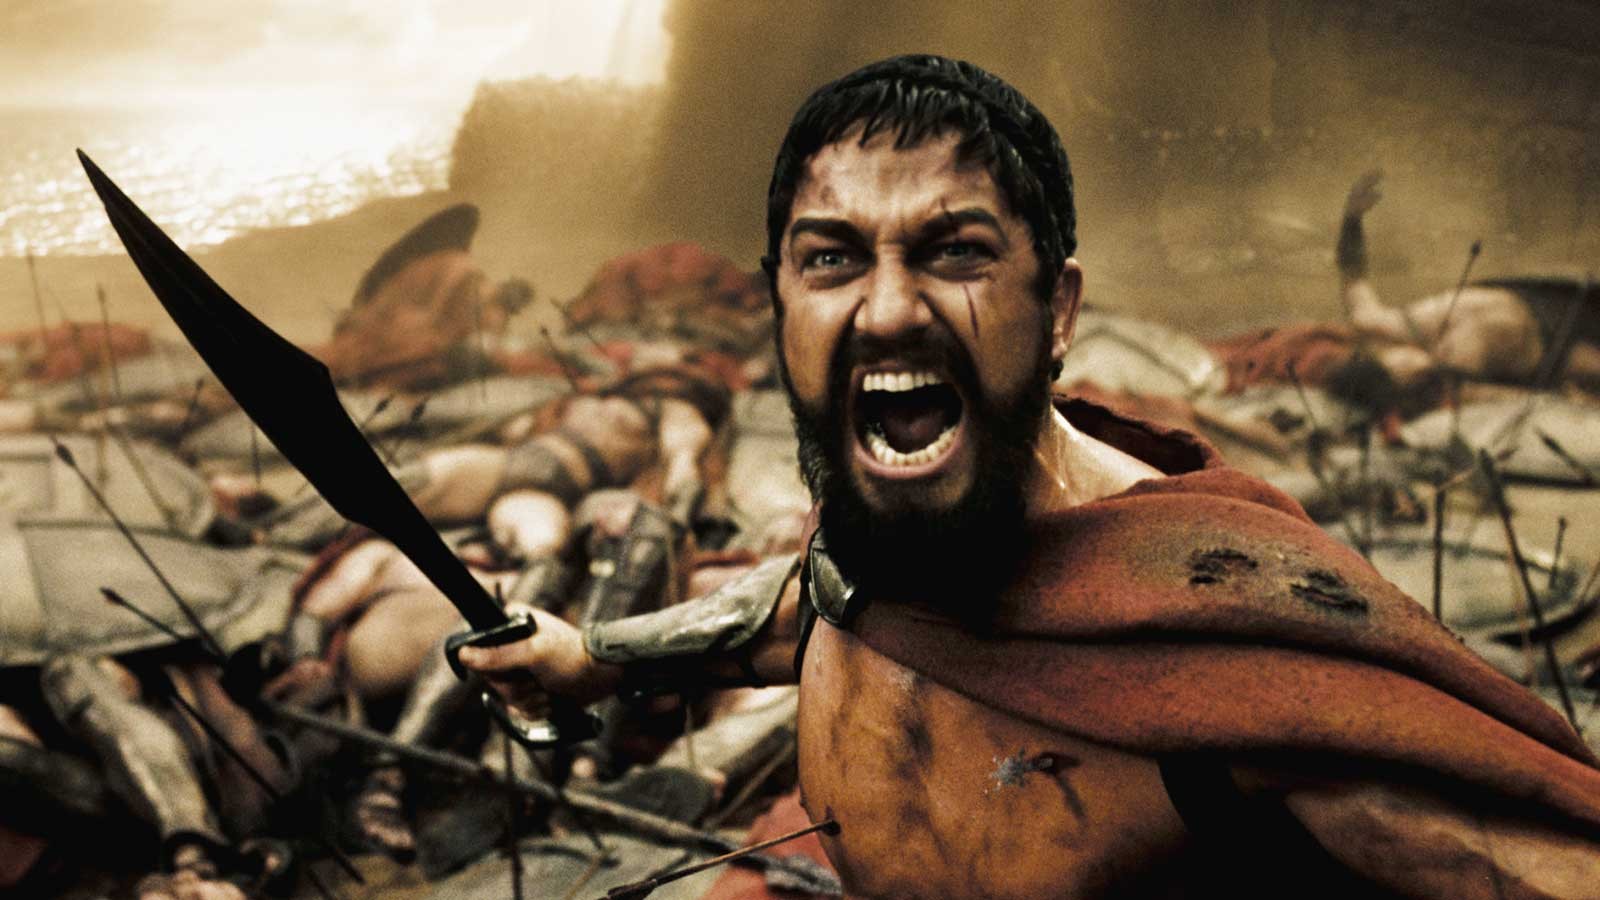 A still featuring an angry King Leonidas from 300